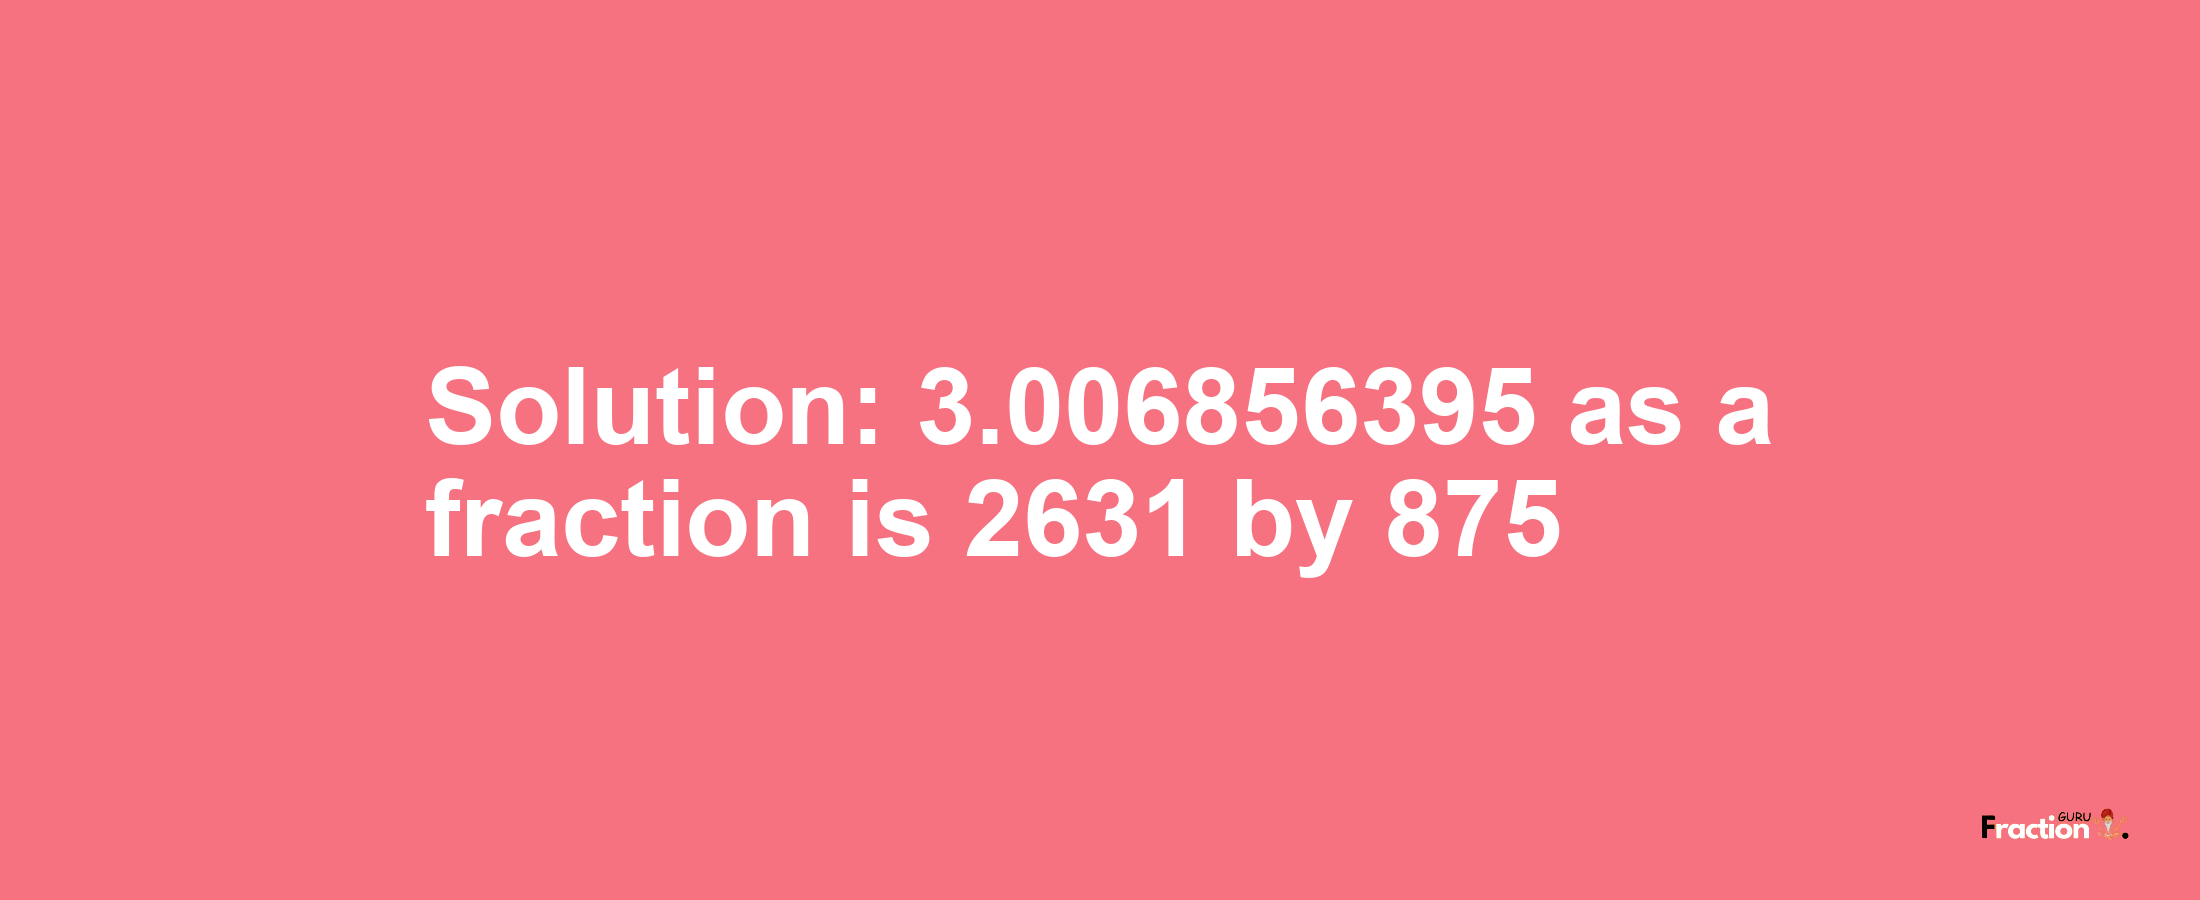 Solution:3.006856395 as a fraction is 2631/875